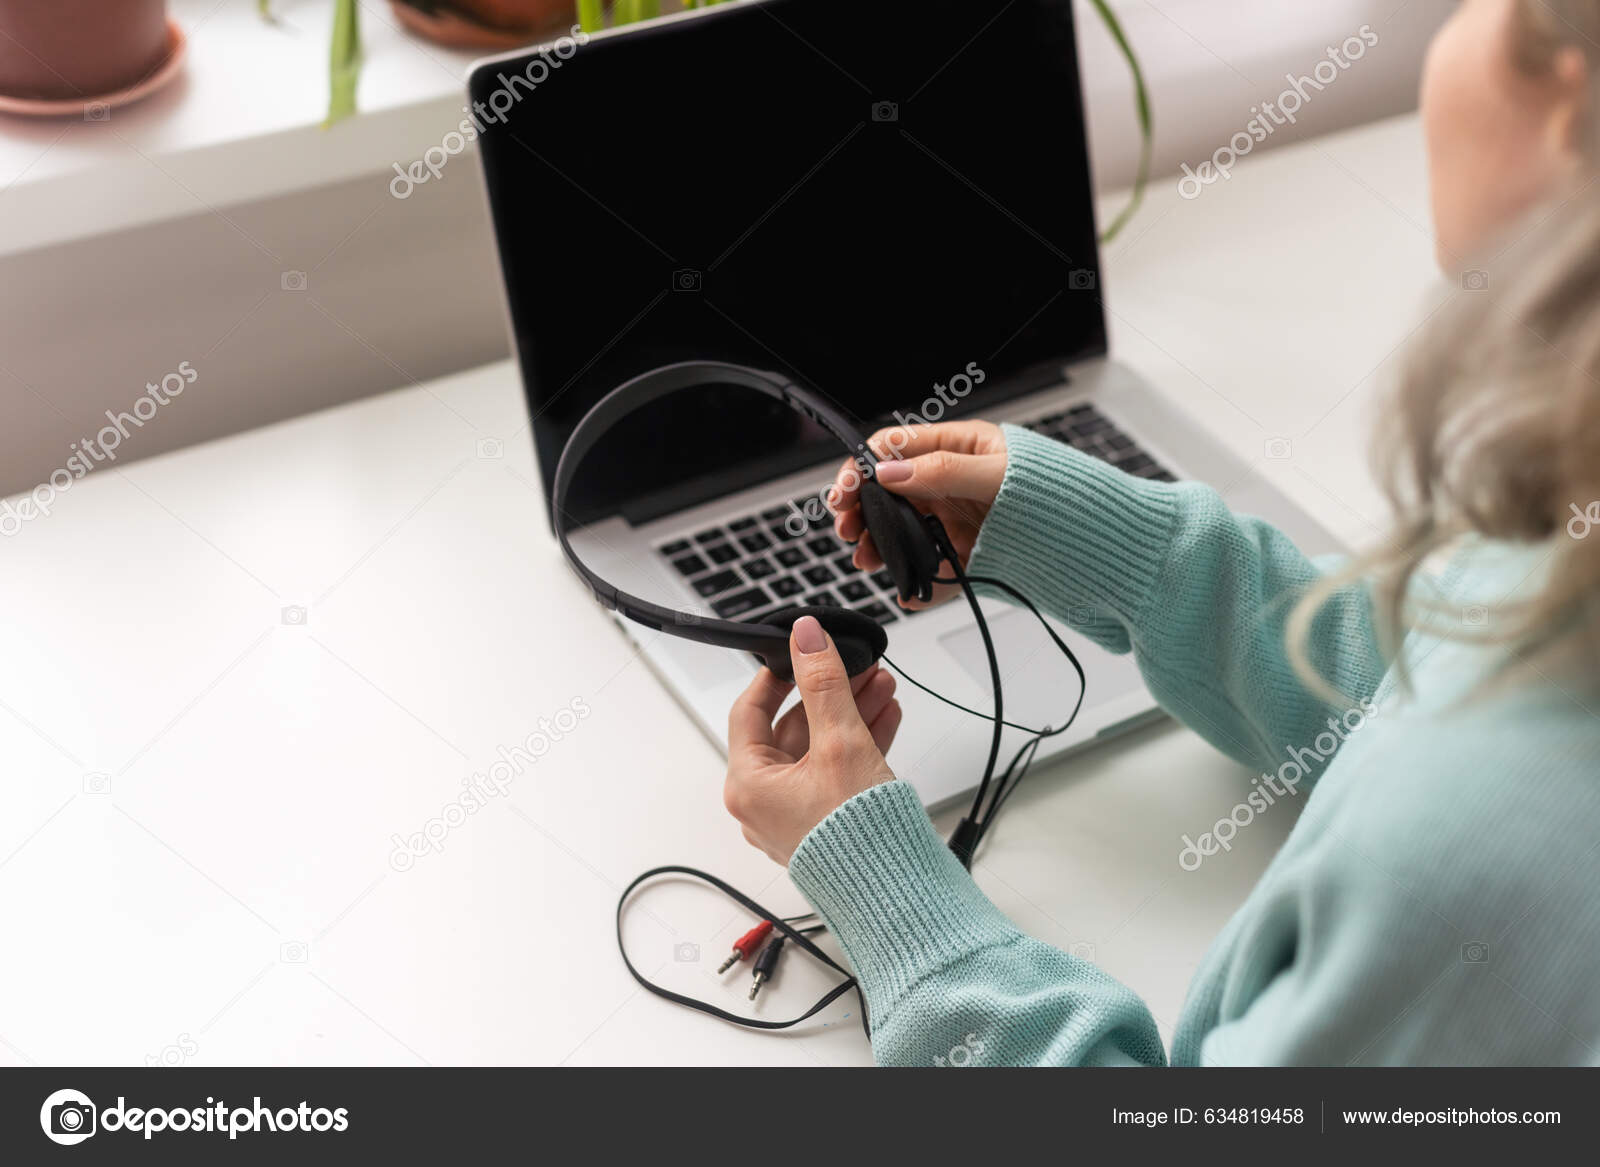 mixed race young woman typing on computer keyboard at table with